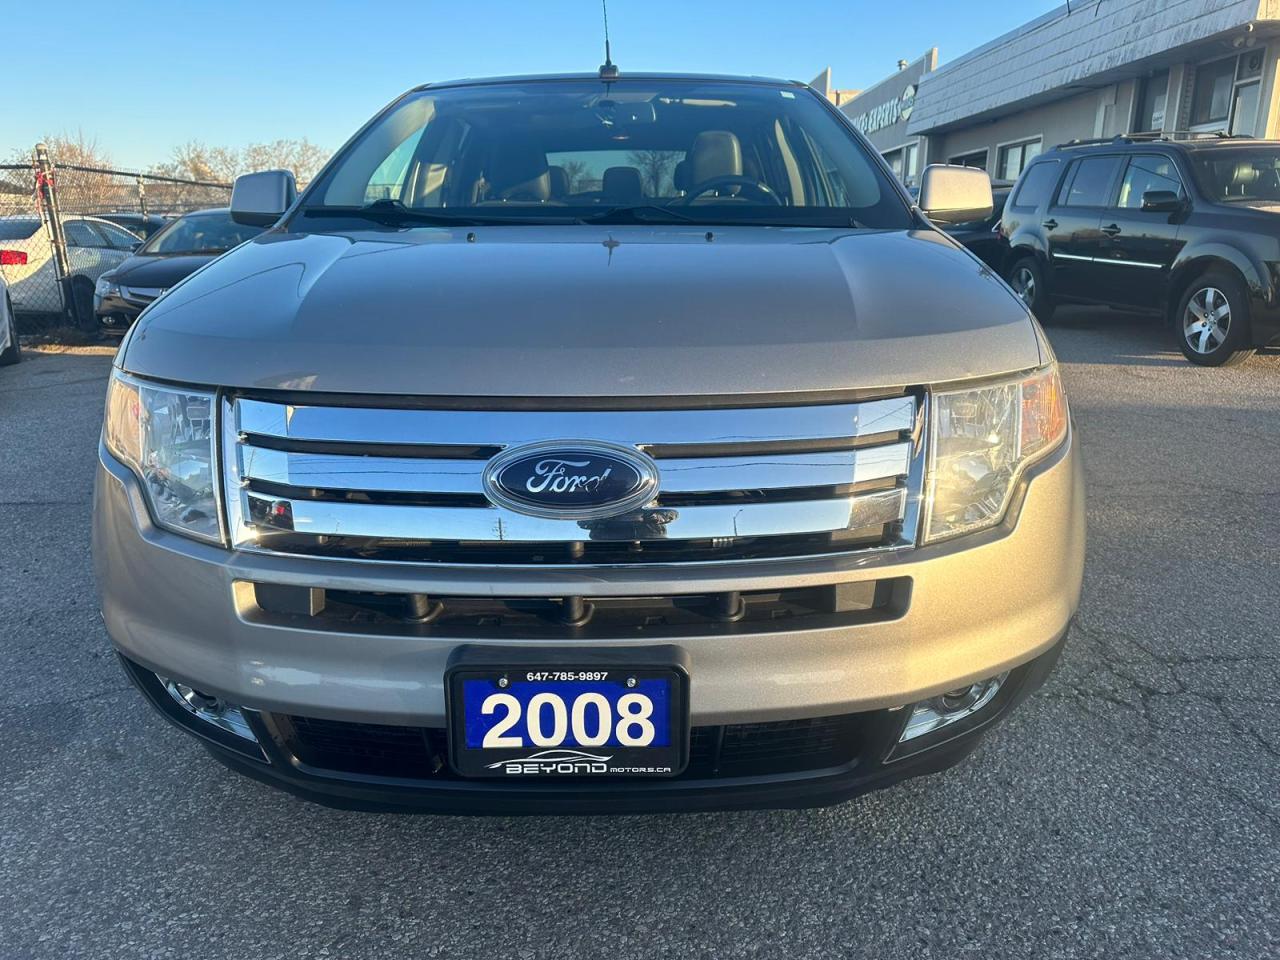 2008 Ford Edge LTD CERTIFIED WITH 3 YEARS WARRANTY INCLUDED - Photo #1